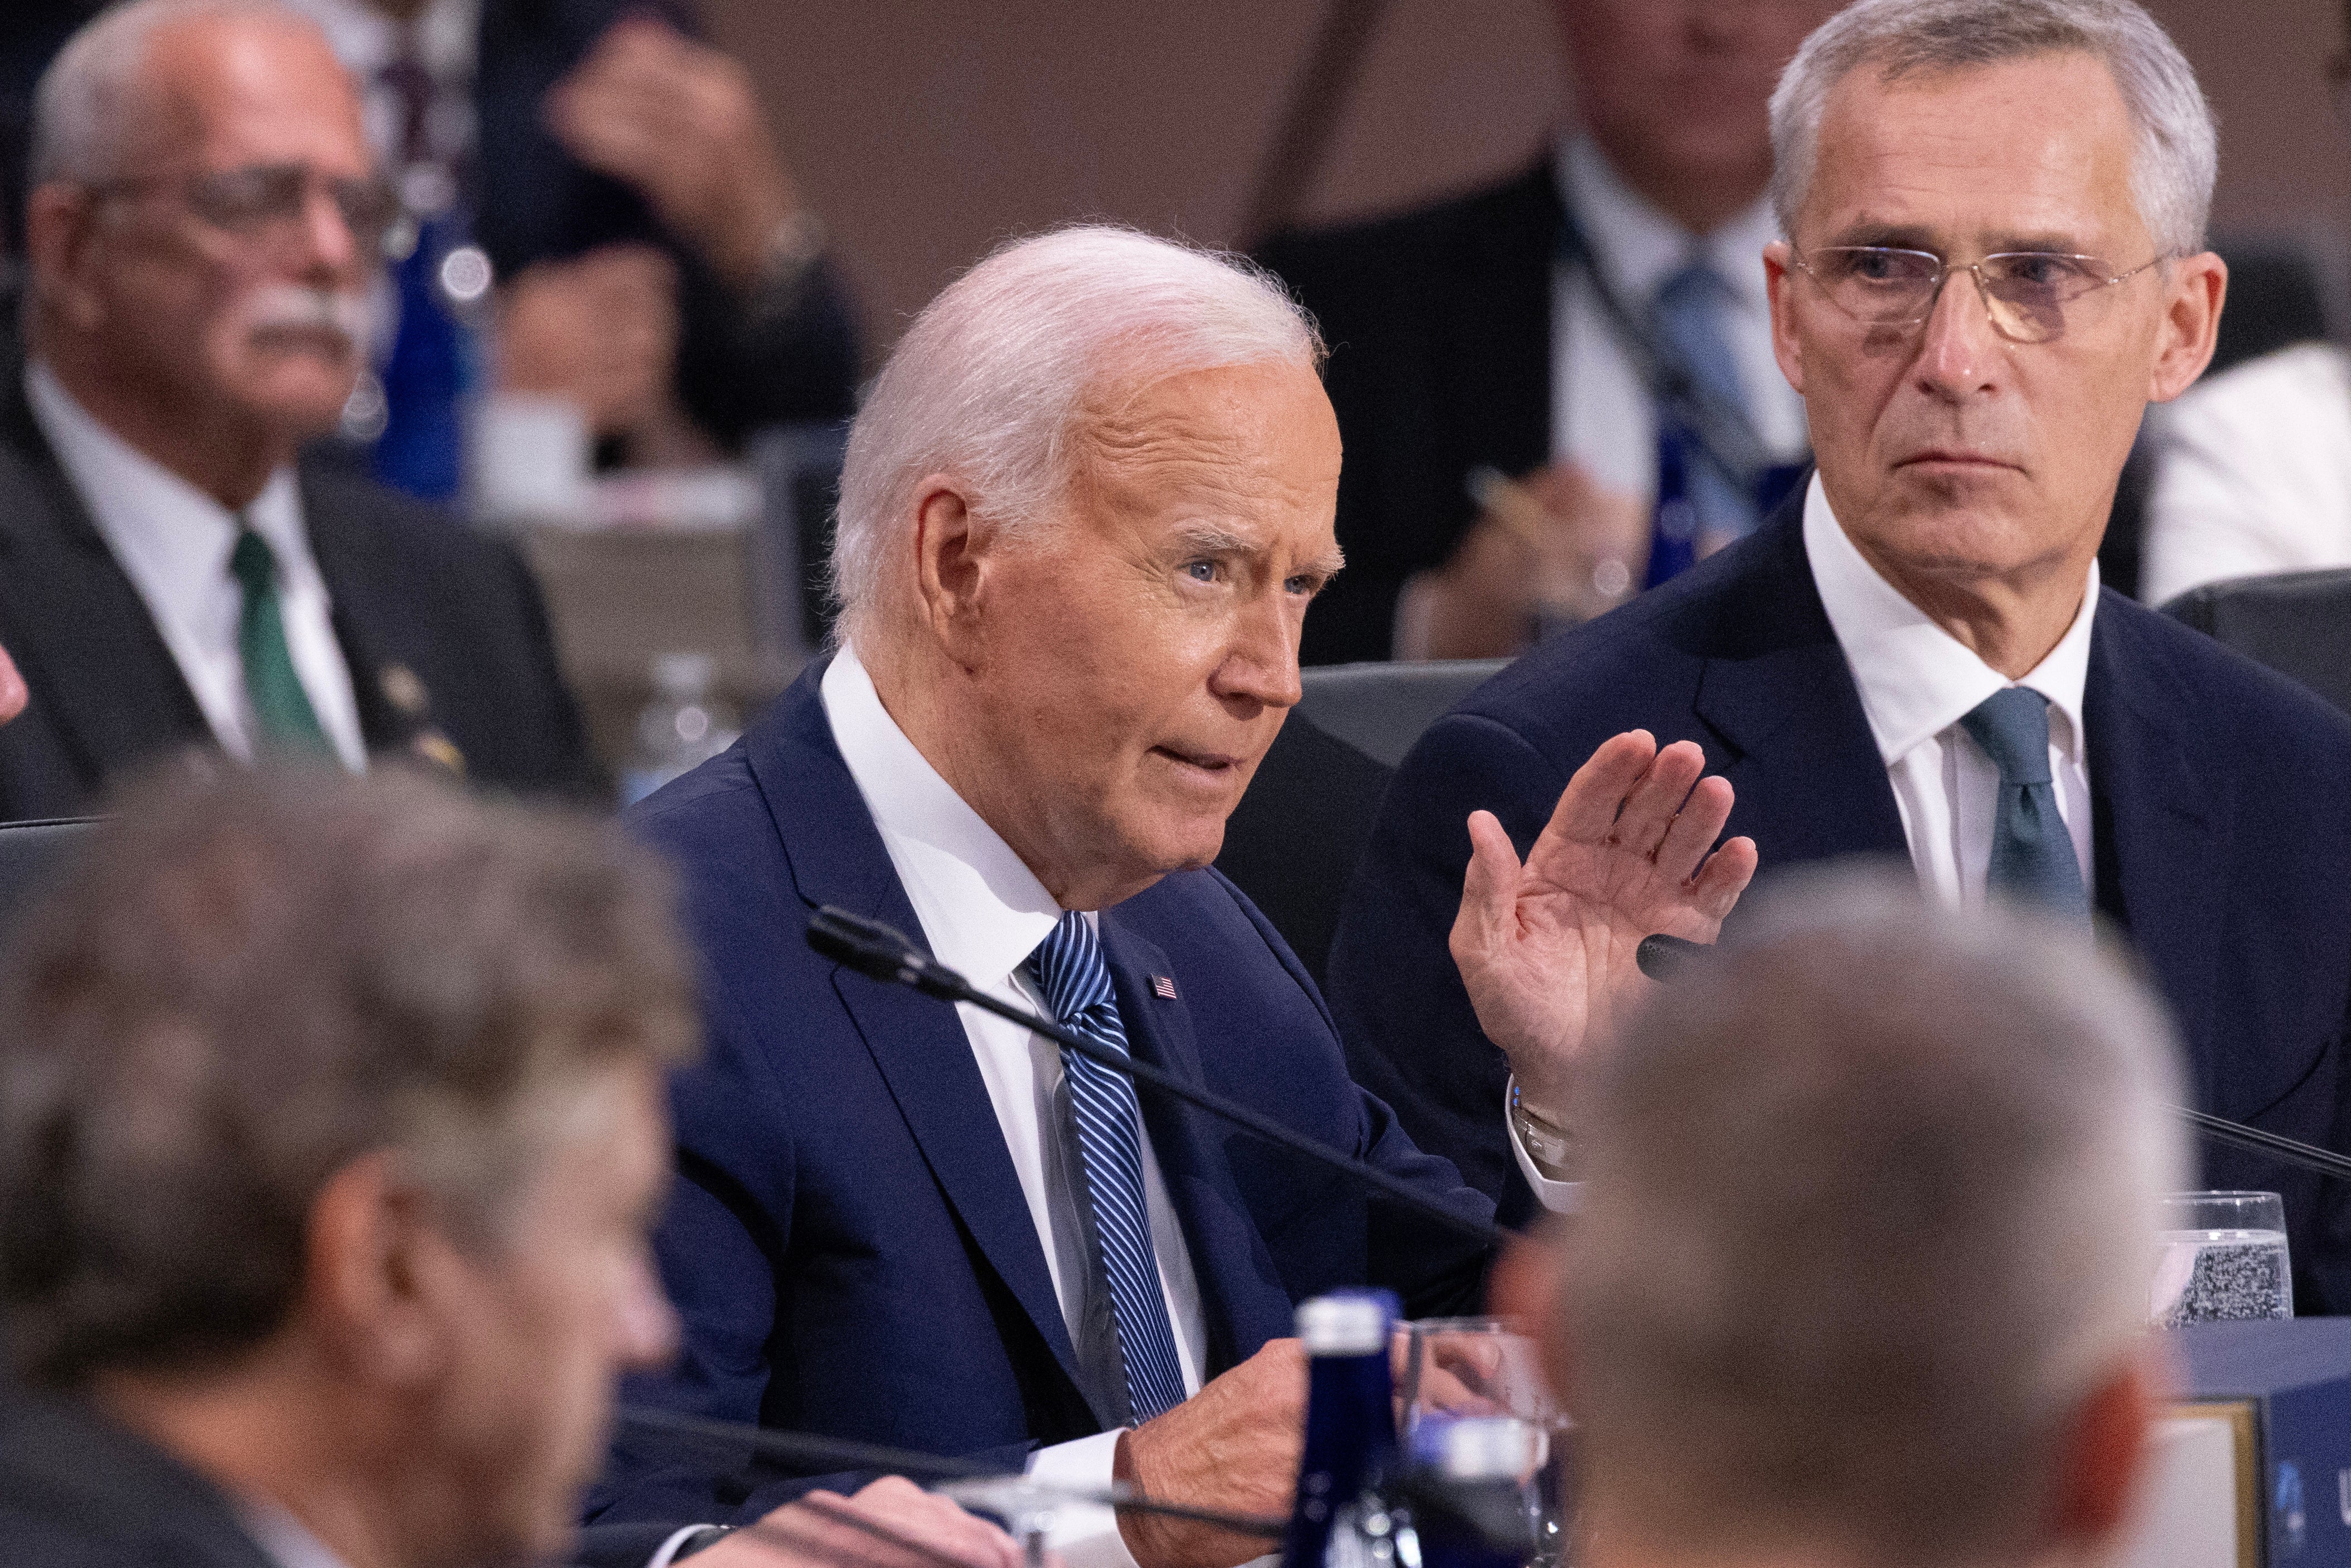 Calls for president Joe Biden to step down as the Democrat’s presidential nominee have continued to grow following his disastrous debate performance on June 27